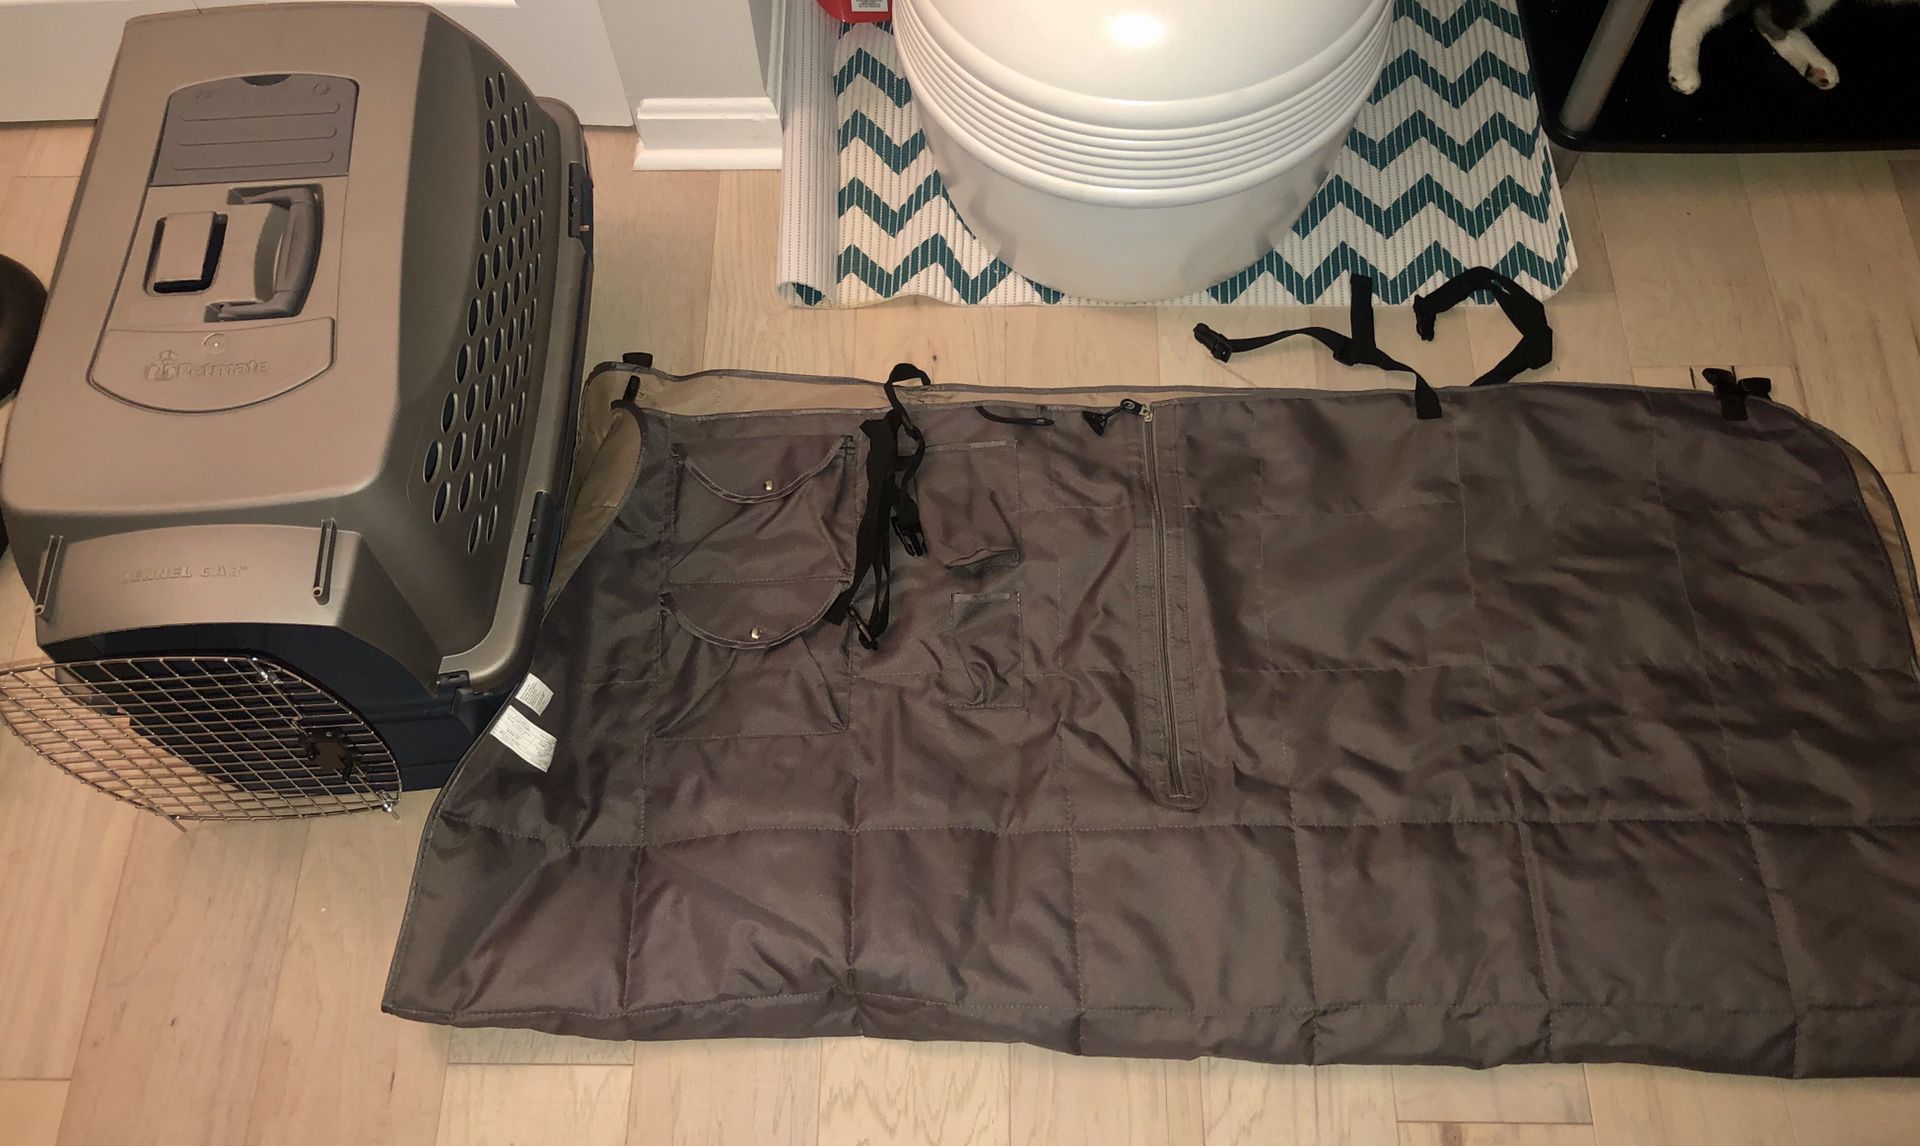 Small Pet Crate & Car seat cover